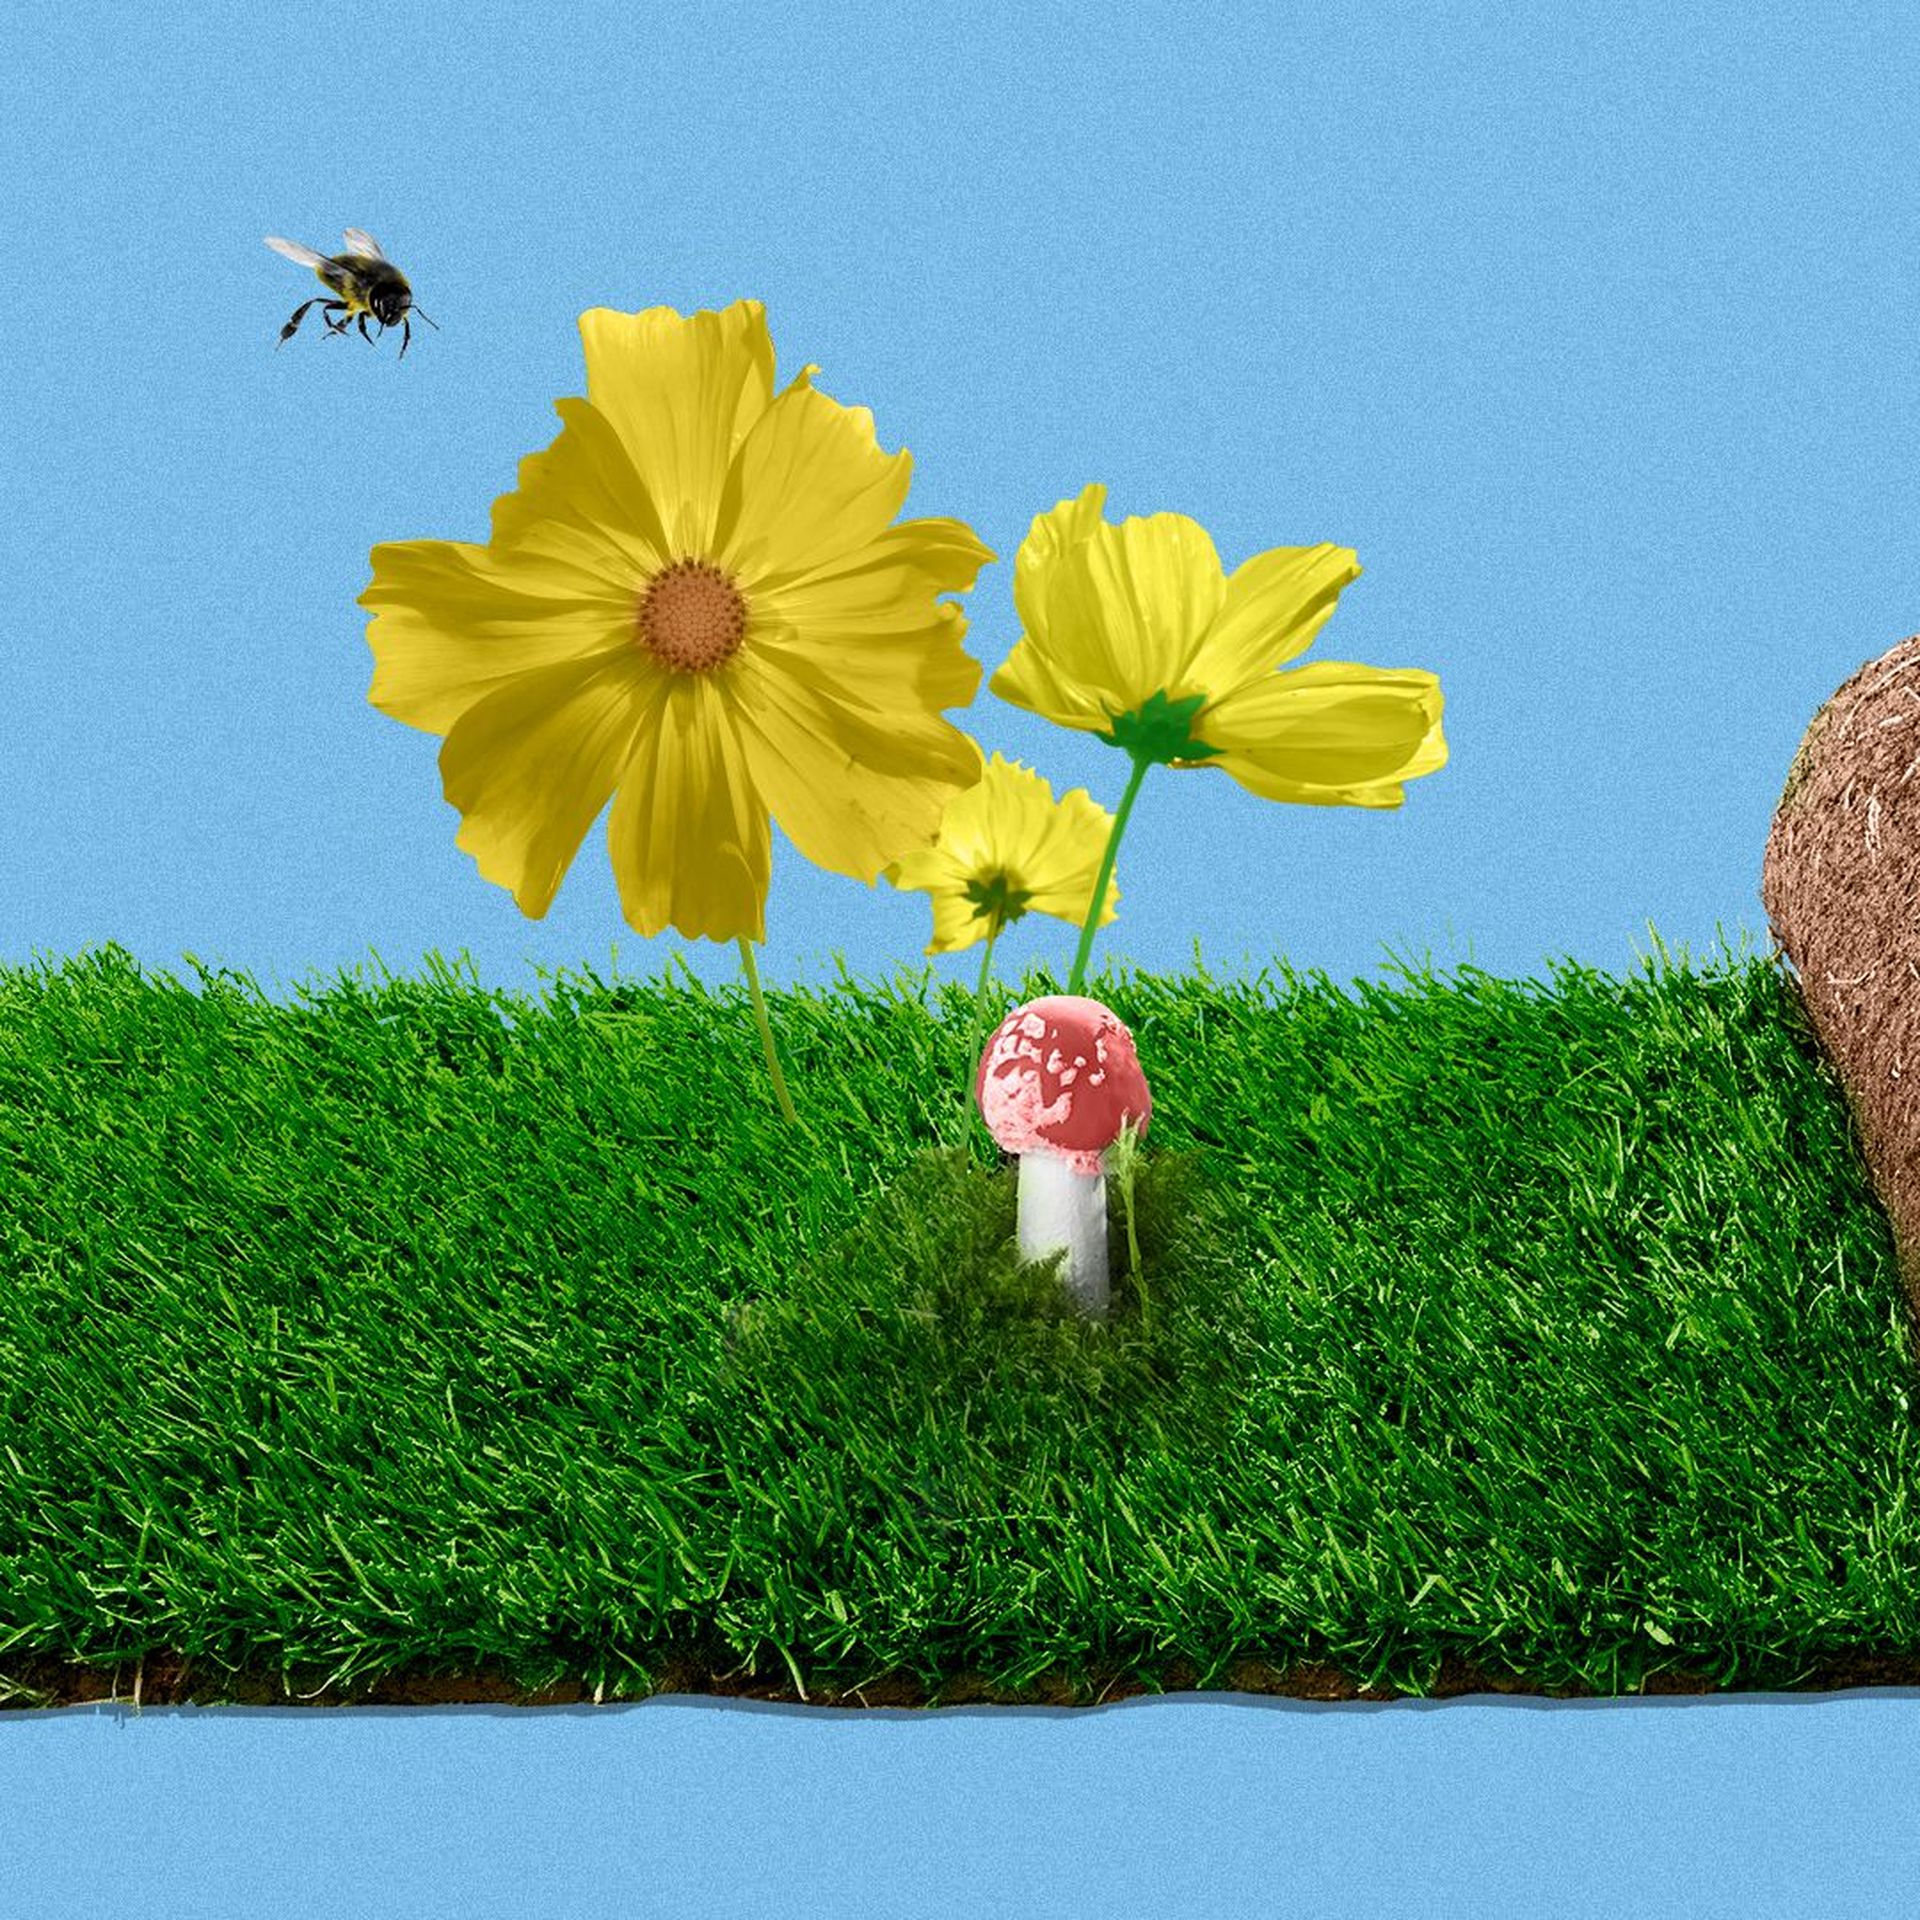 Illustration of a roll of turf opening to reveal flowers, a bee, and a mushroom.